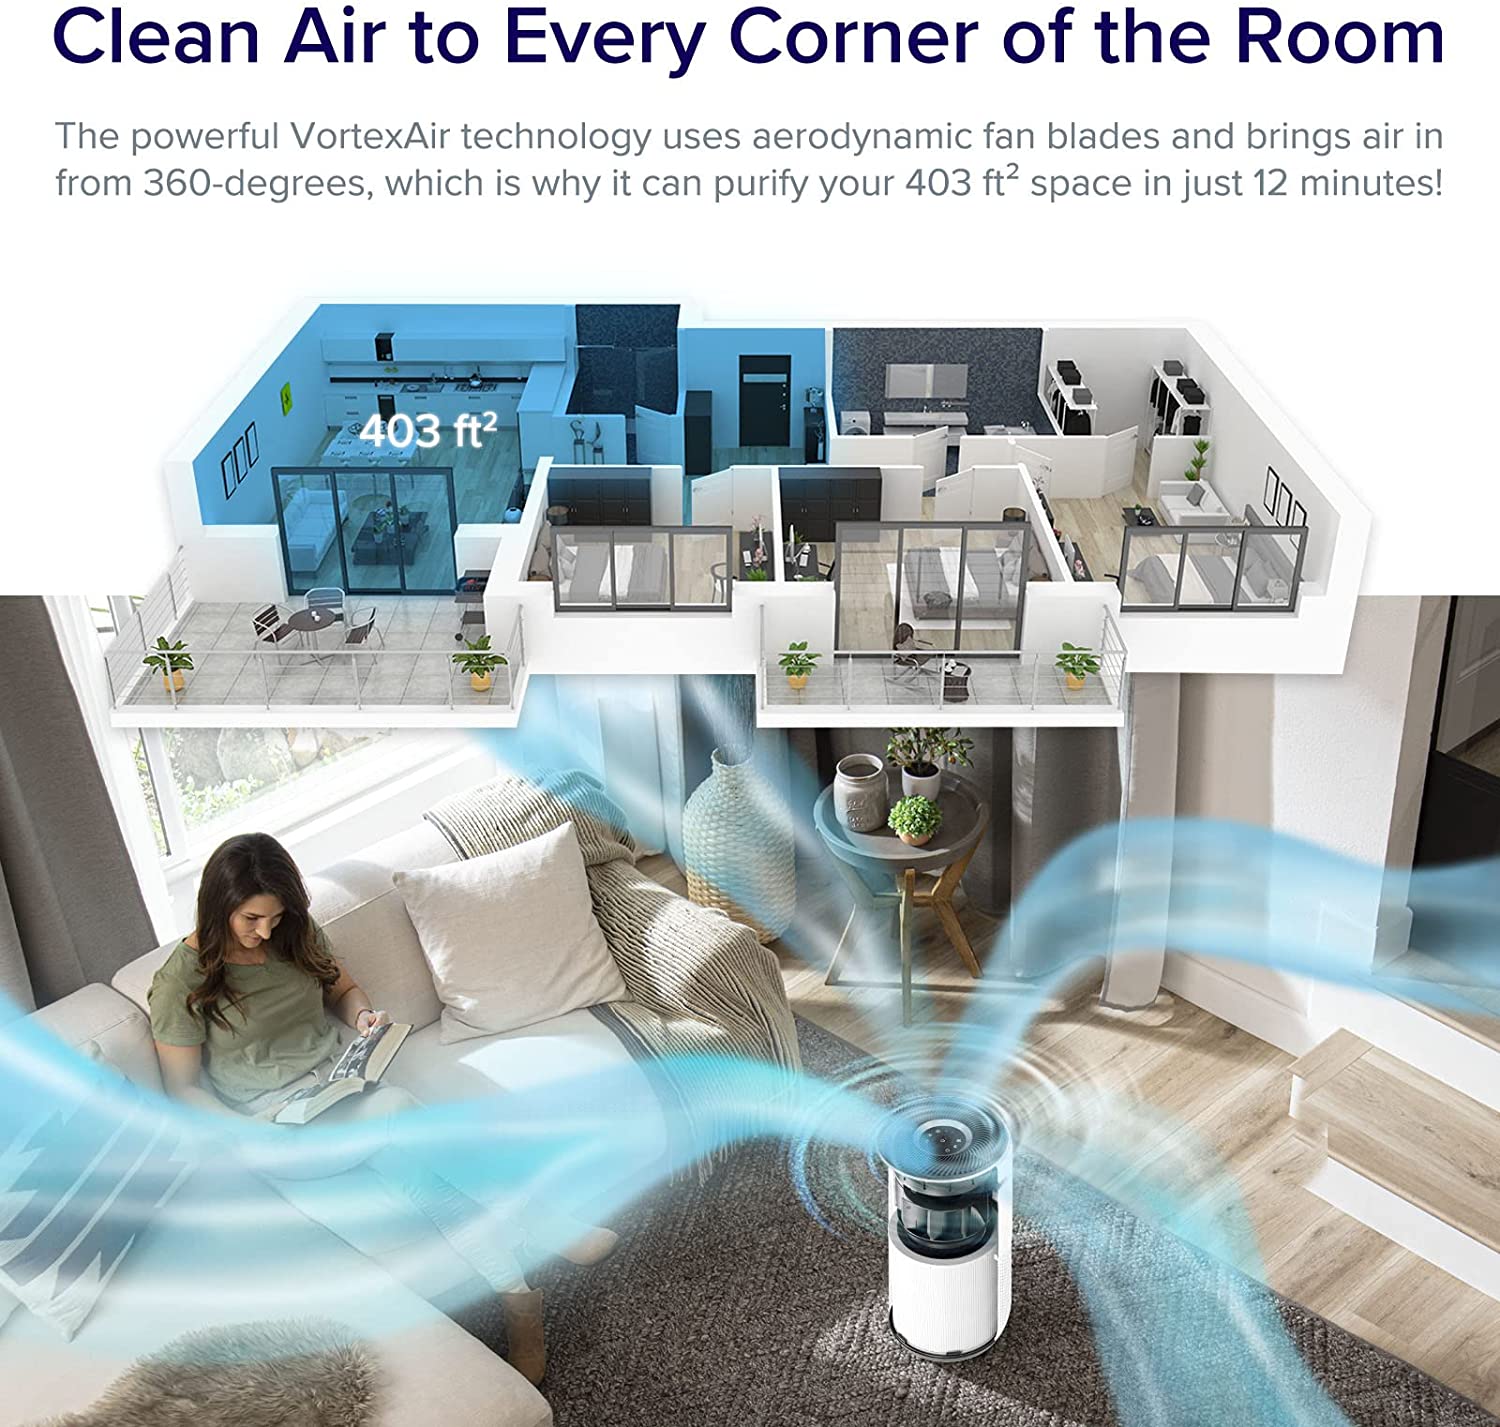 LEVOIT Air Purifiers for Home Large Room, Smart WiFi and PM2.5 Monitor H13  True HEPA Filter Removes Up to 99.97% of Particles, Pet Allergies, Smoke,  Dust, Auto Mode, Alexa Control, 1005